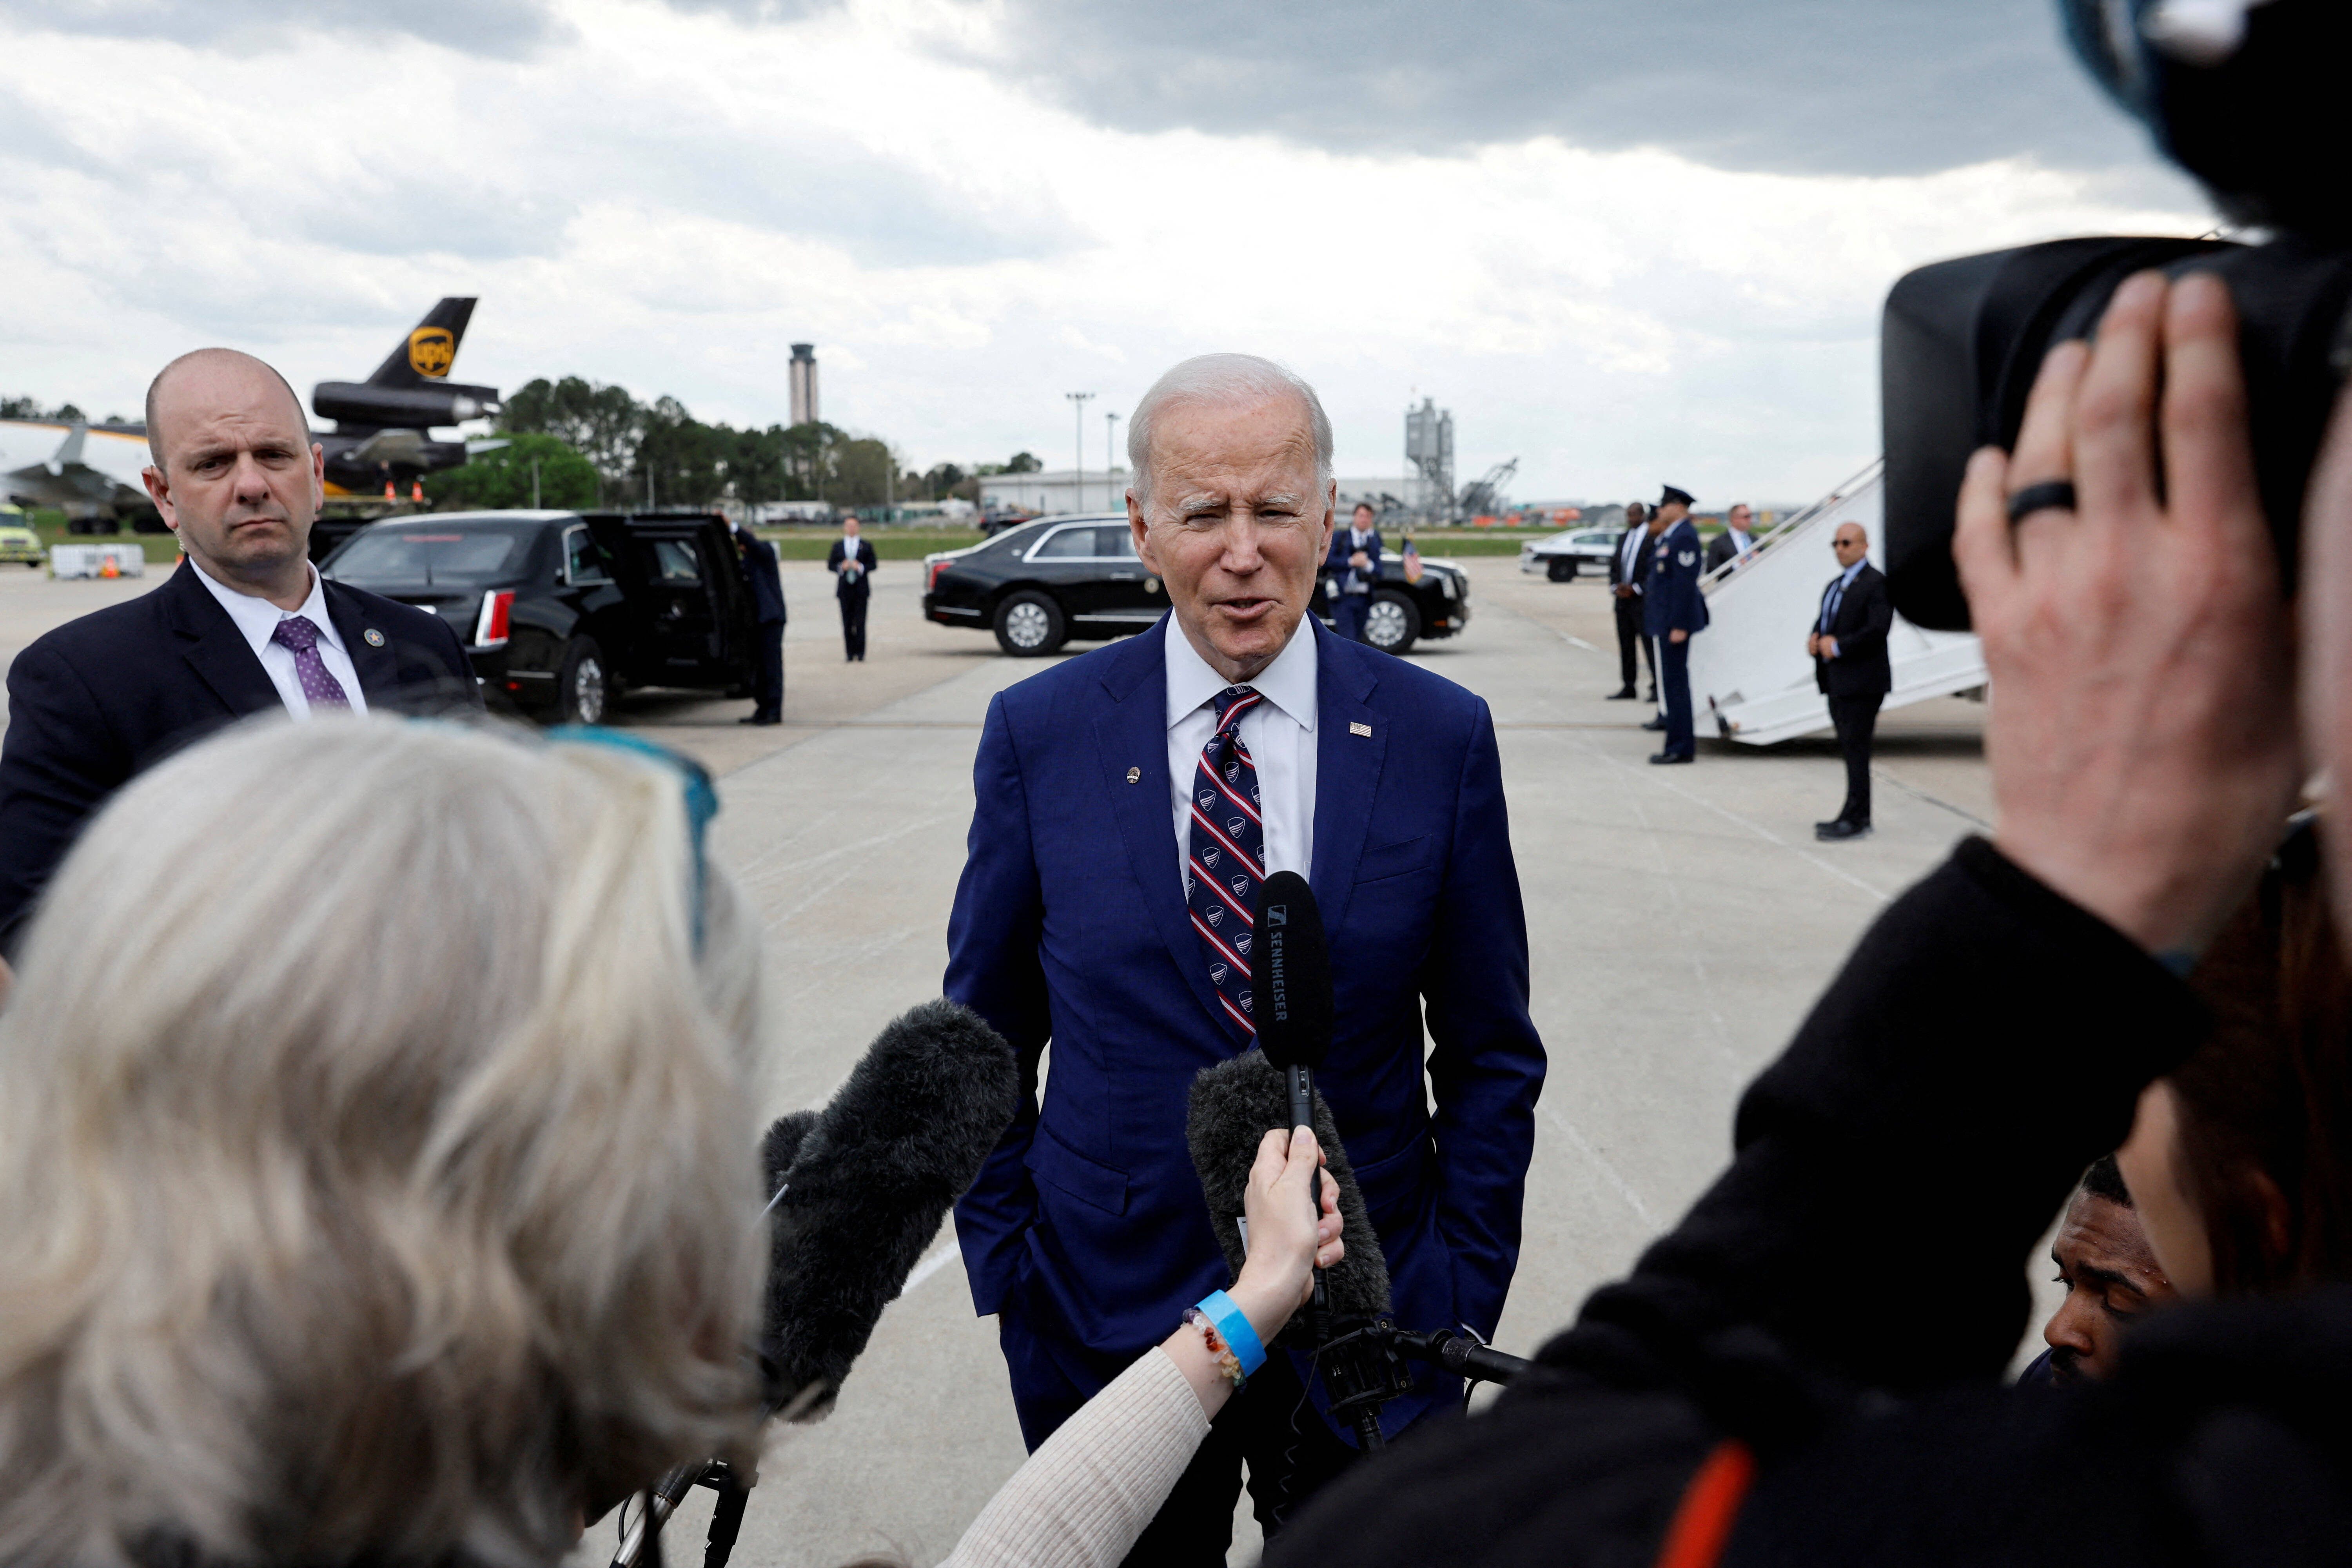 U.S. President Joe Biden speaks with reporters before boarding Air Force One to return to Washington from Raleigh-Durham International Airport, Morrisville, North Carolina, U.S., March 28, 2023. REUTERS/Jonathan Ernst